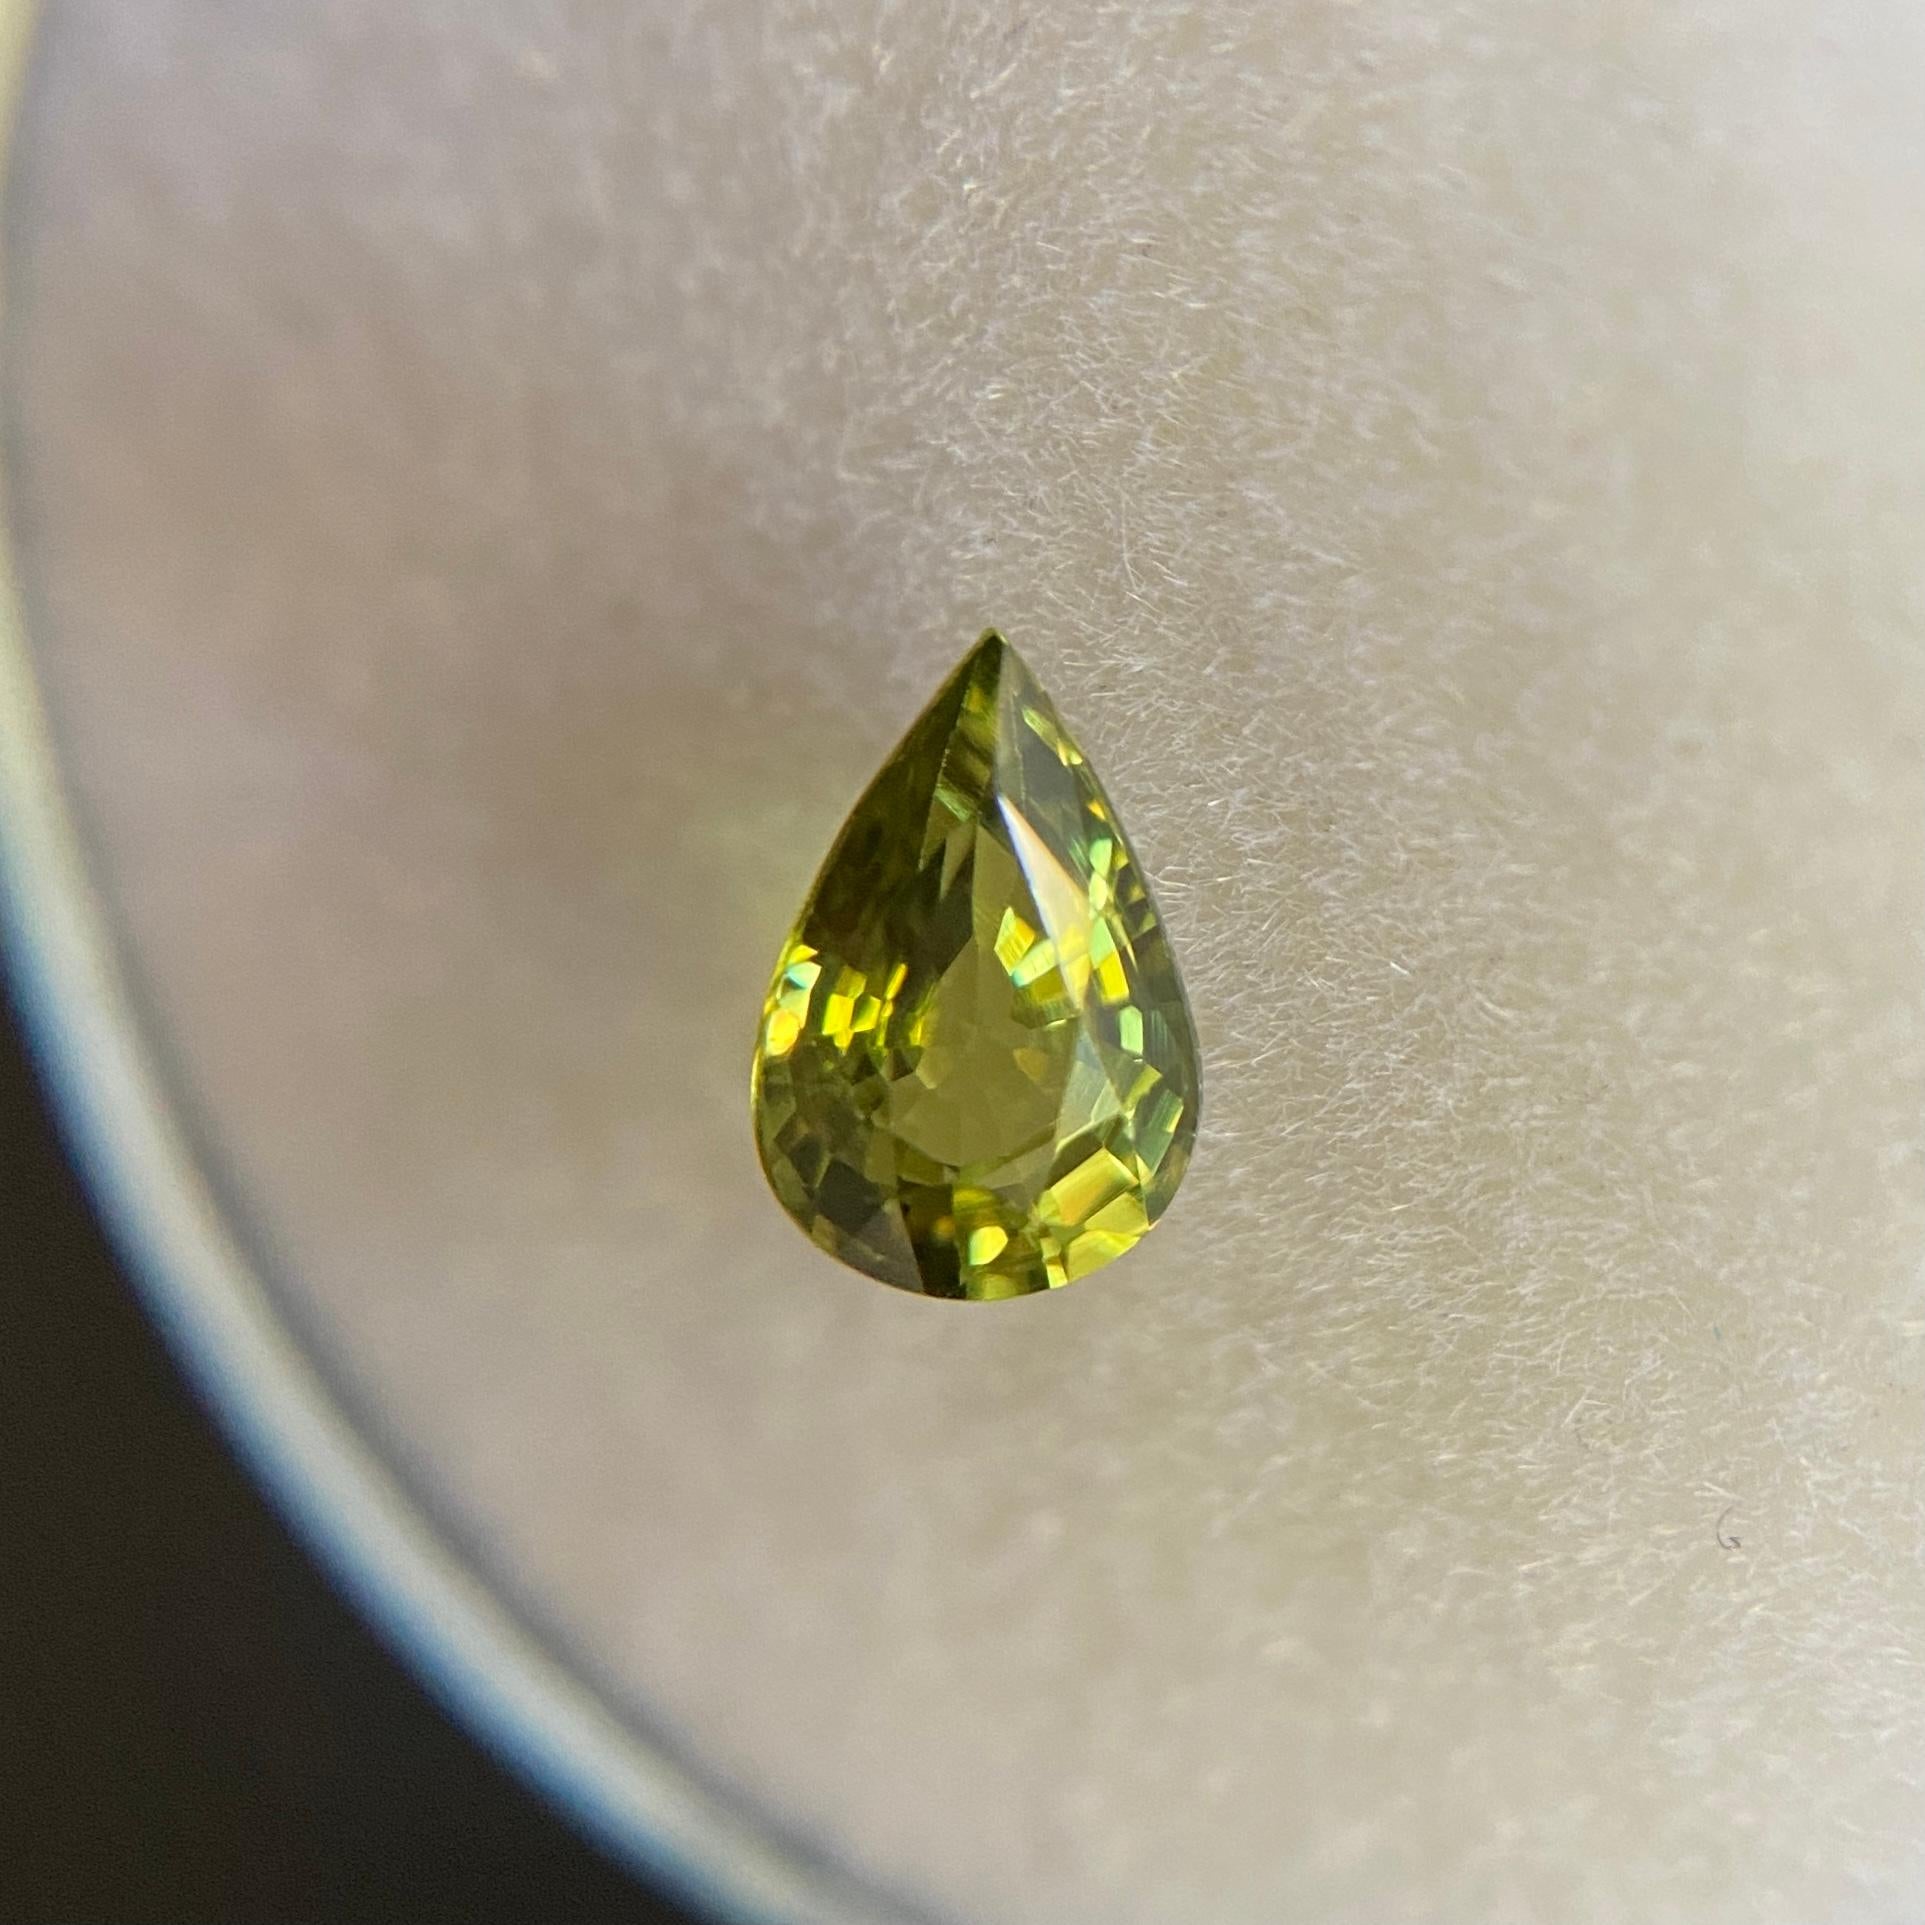 Natural Untreated Yellow Green Australian Sapphire Gemstone.

0.60 Carat with a beautiful vivid green yellow colour and excellent clarity, a very clean stone with only some small natural inclusions visible when looking closely. Also has an excellent